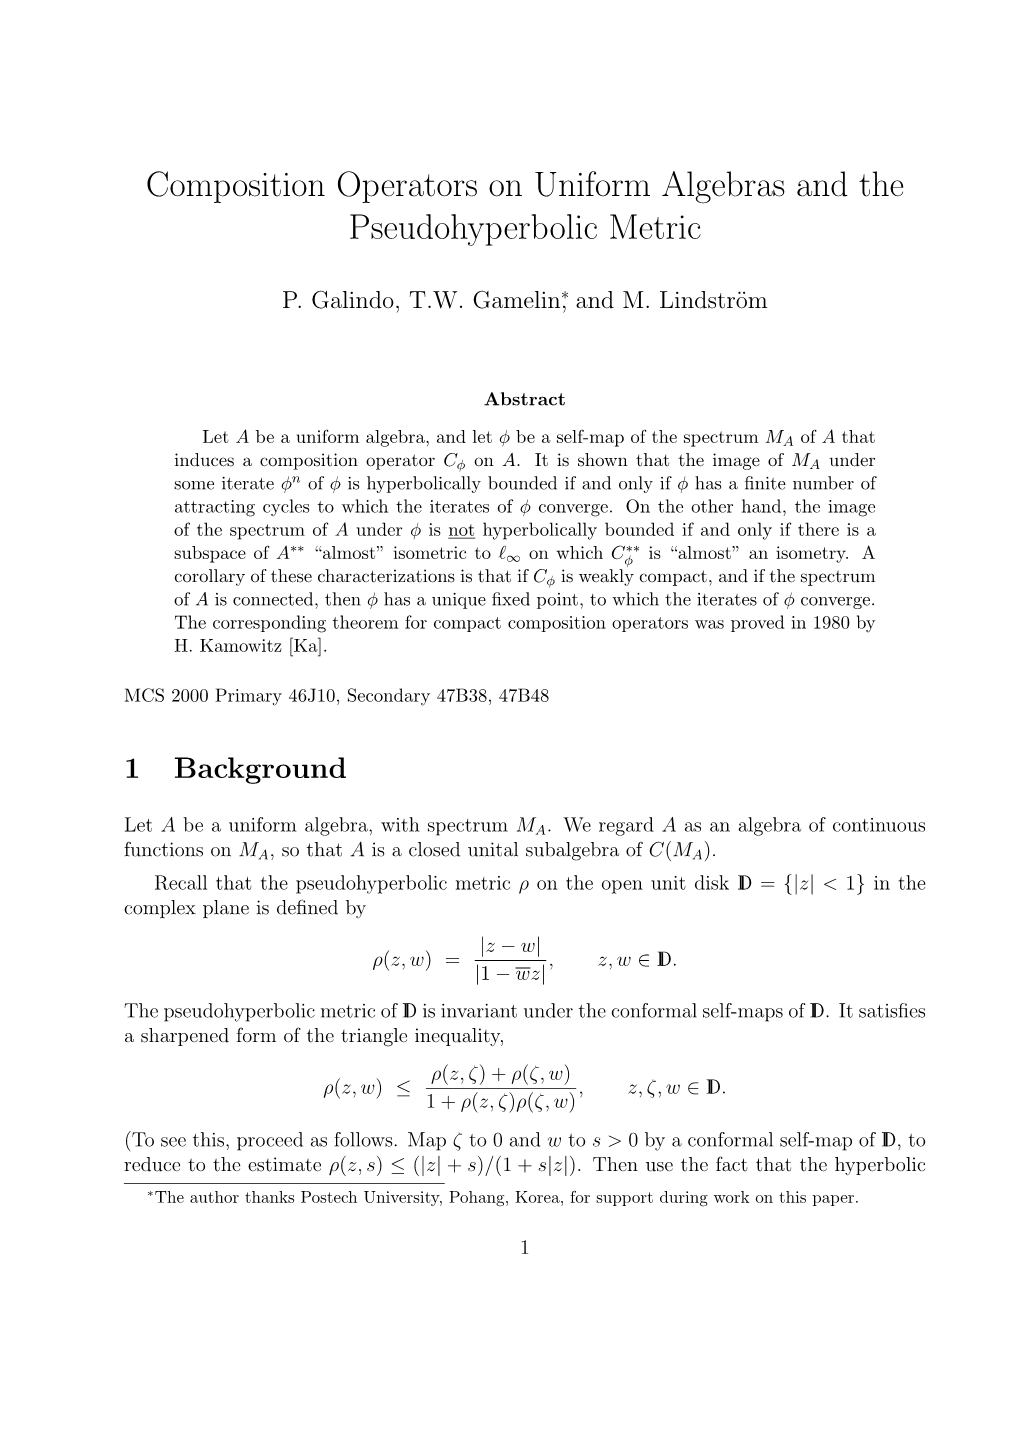 Composition Operators on Uniform Algebras and the Pseudohyperbolic Metric